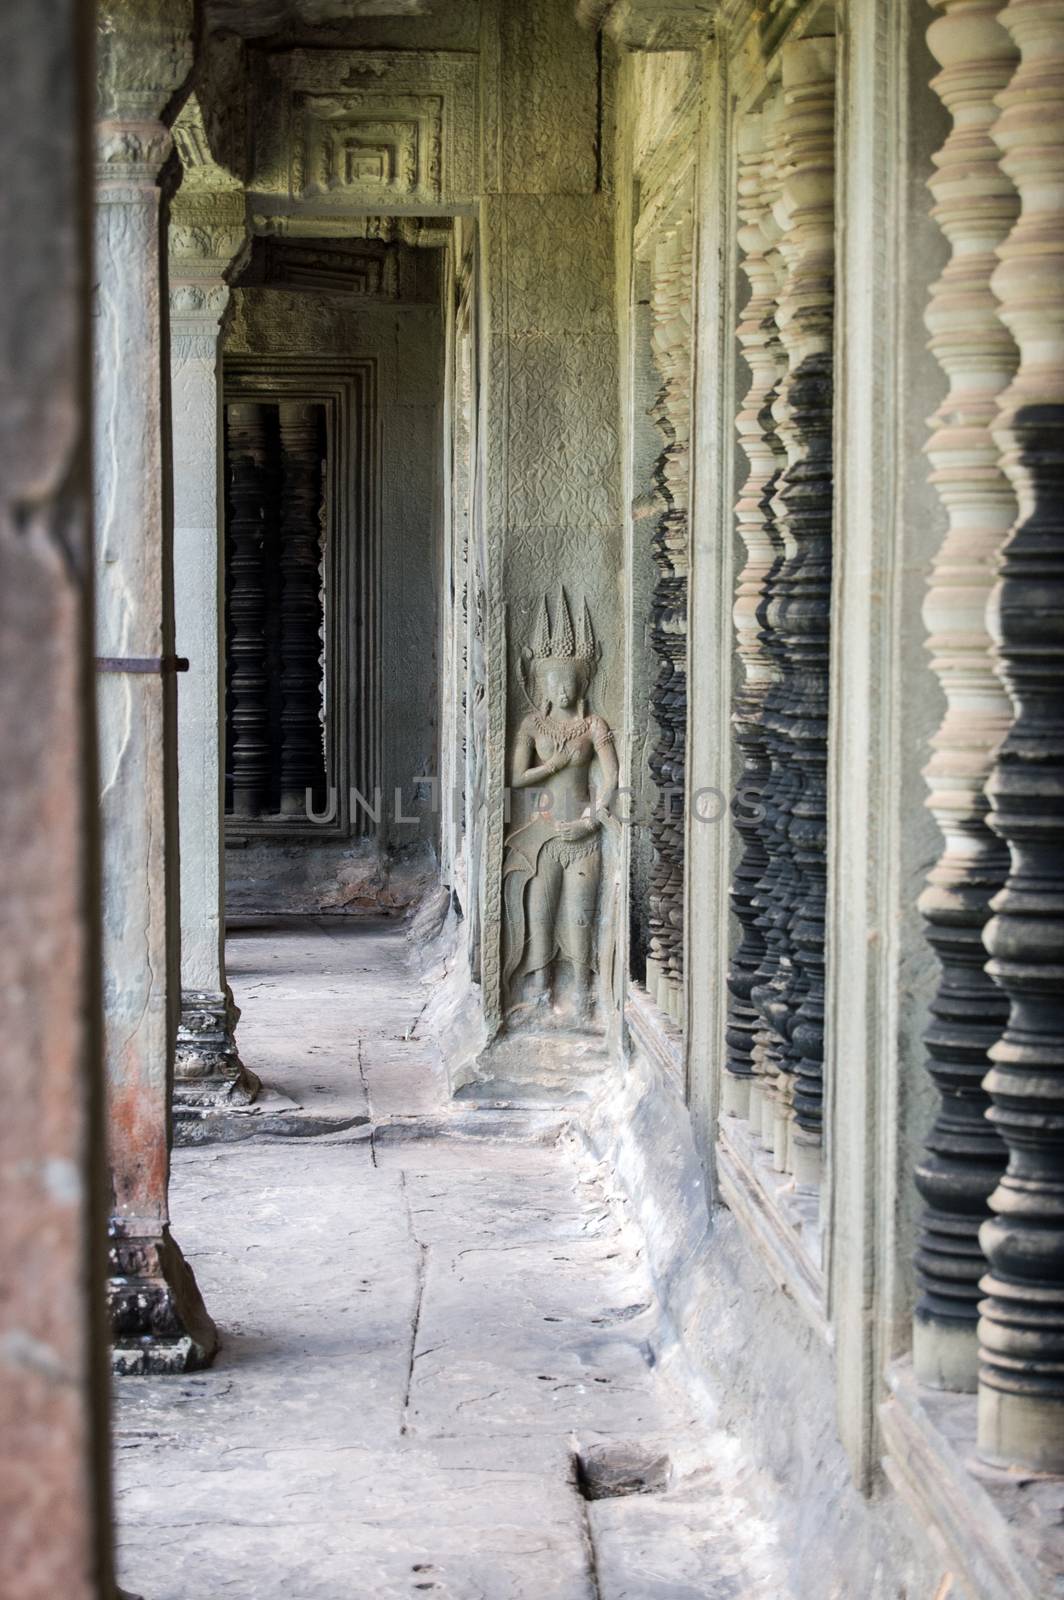 Interior of the Northern Gallery of the ancient Khmer Angkor Wat temple, Siem Reap, Cambodia. Turned stone window bars are on the right hand side, a carved Apsara dancer is in the centre.